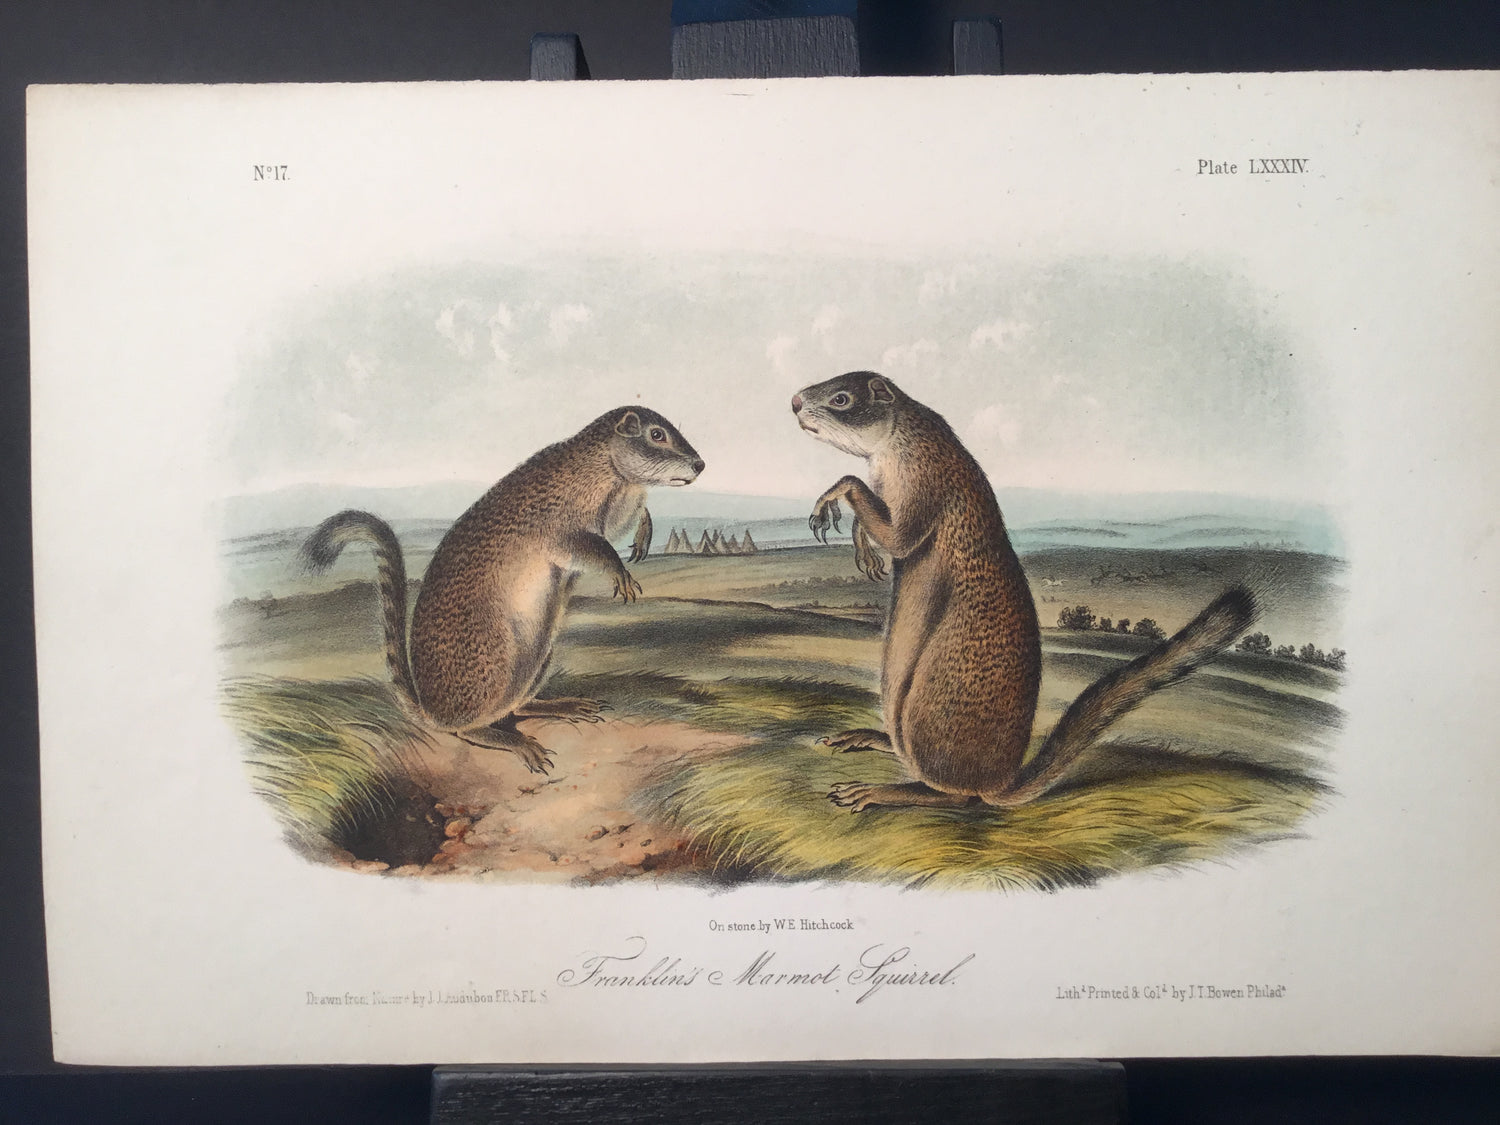 Lord-Hopkins Collection - Franklin’s Marmot Squirrel